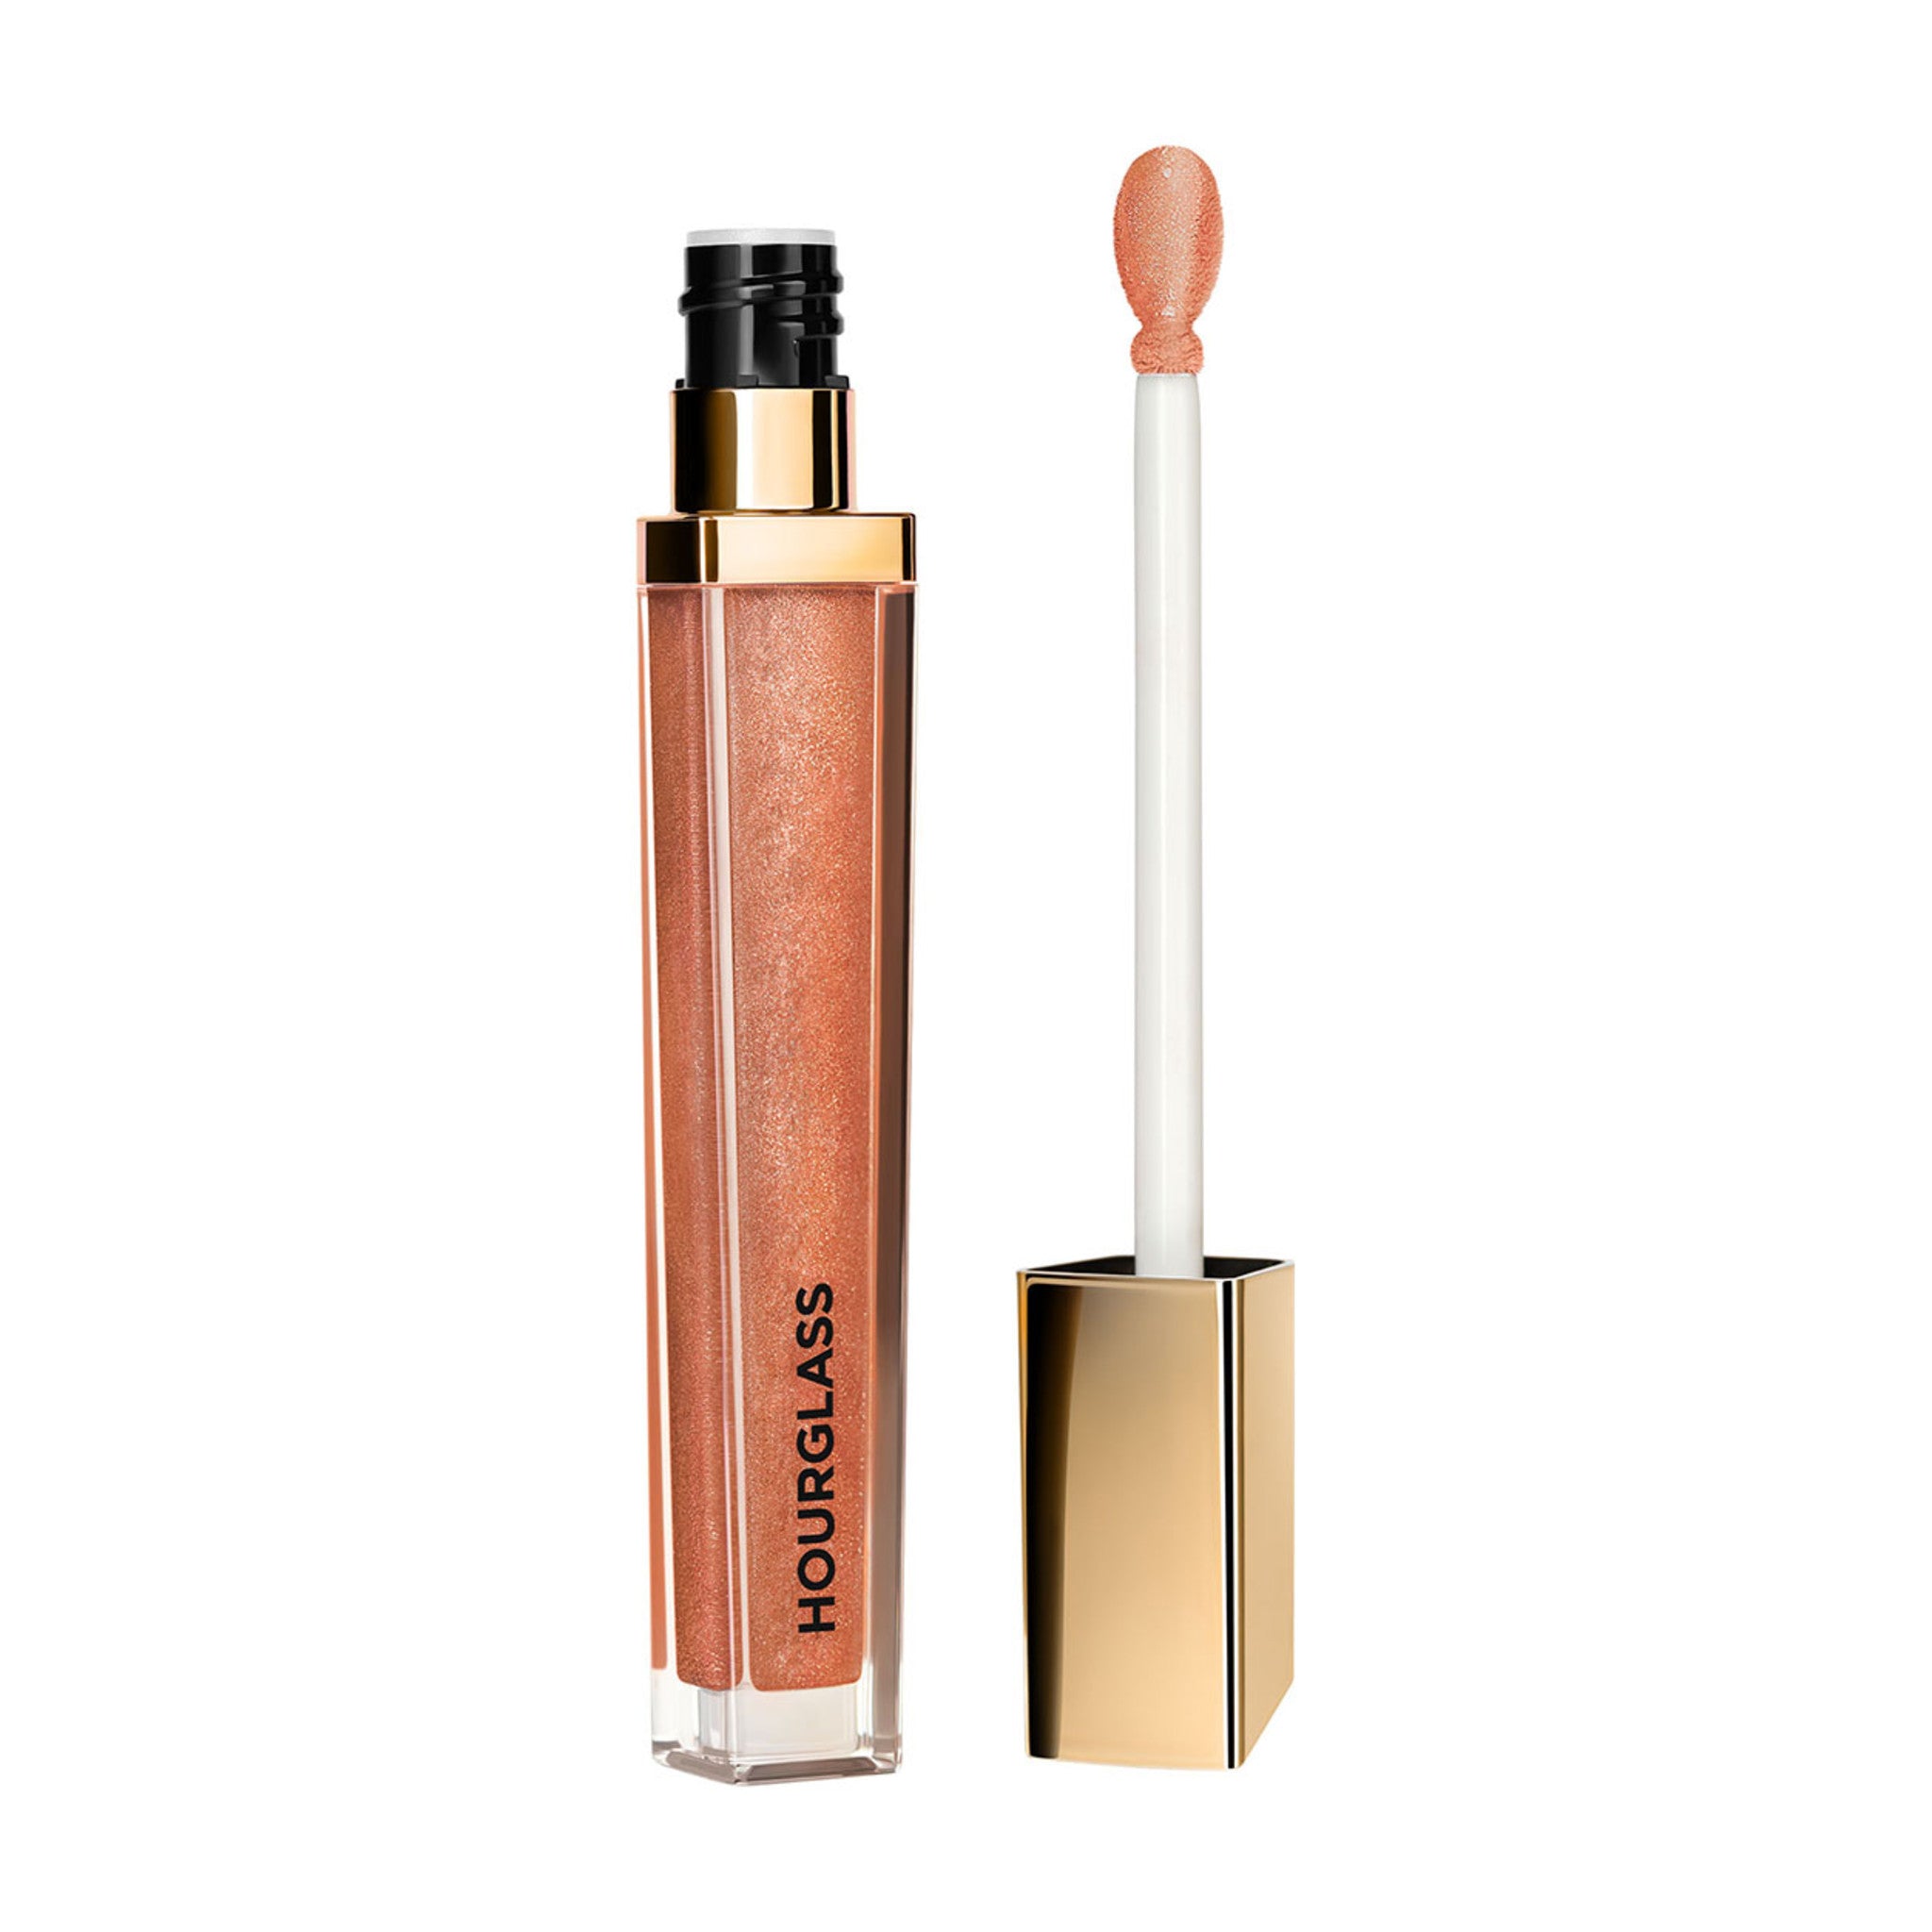 Hourglass Unreal High Shine Volumizing Lip Gloss Color/Shade variant: Ignite main image. This product is in the color nude